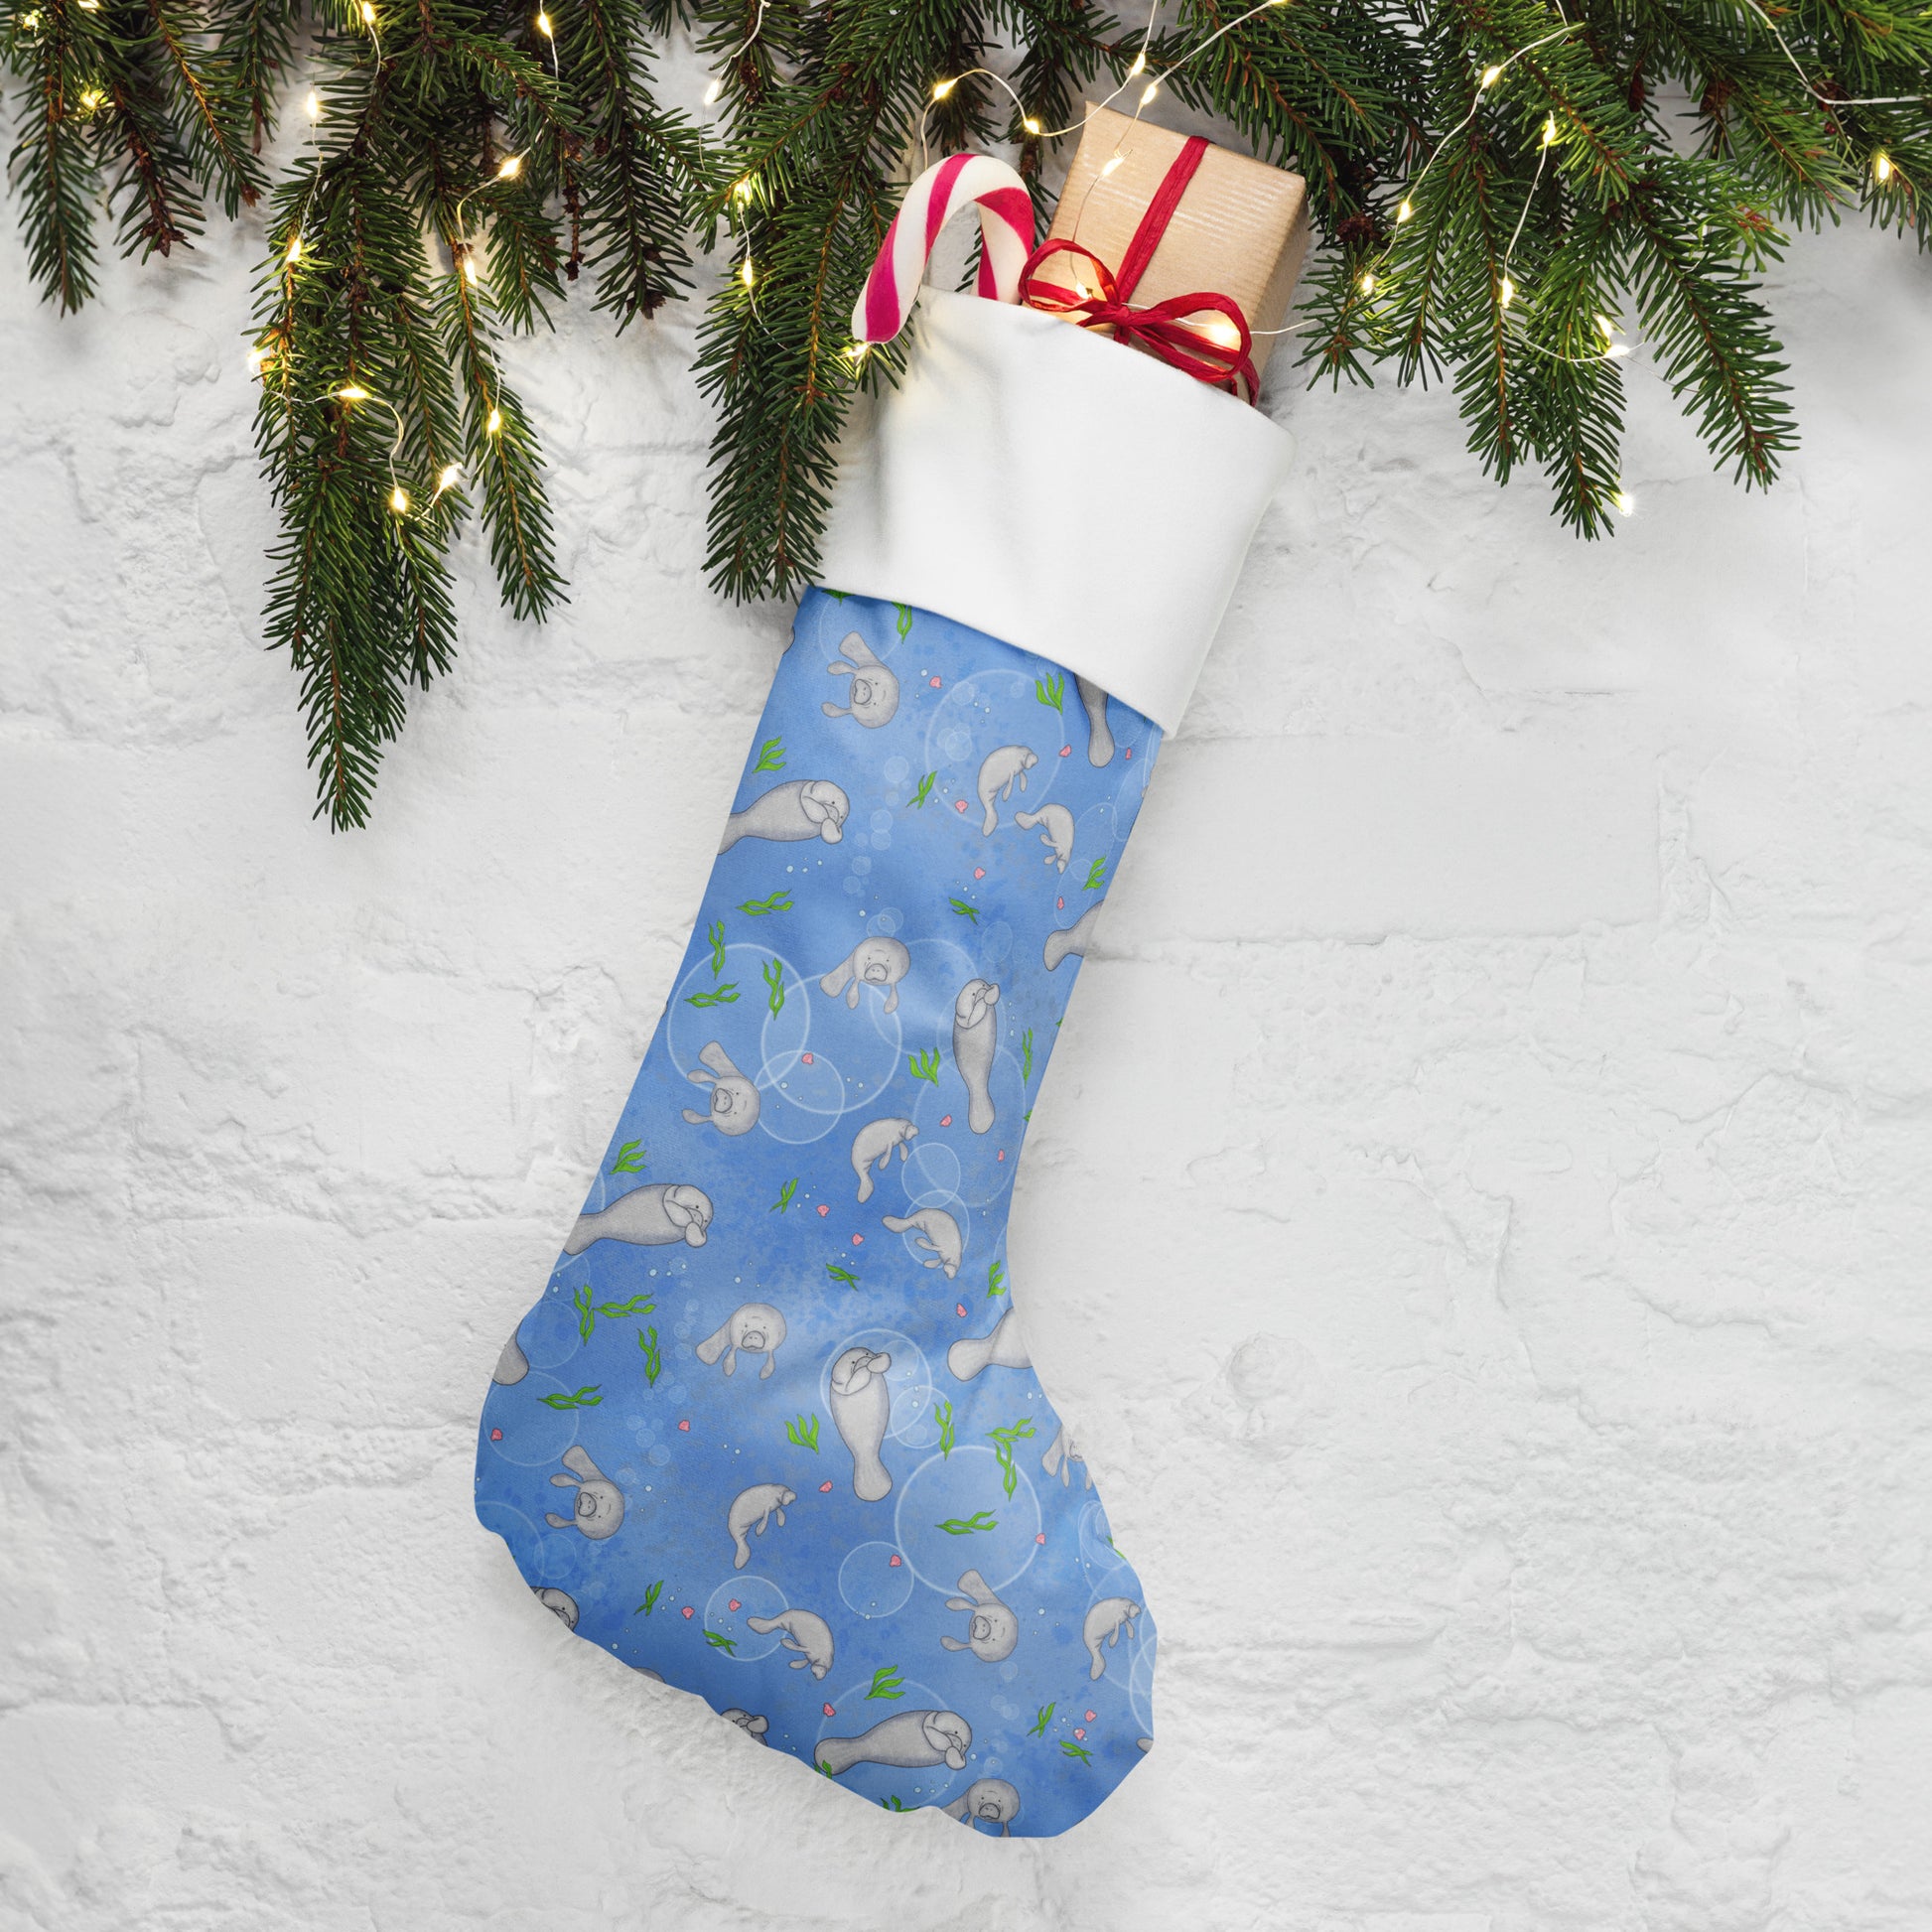 Limited Edition Manatee Christmas Stocking.  7 by 18 inches. The front has a hand-illustrated manatee design with an off-white polyester fabric on the back. It has a white fold-over cuff and a loop for hanging. Shown stuffed with gifts by pine boughs.